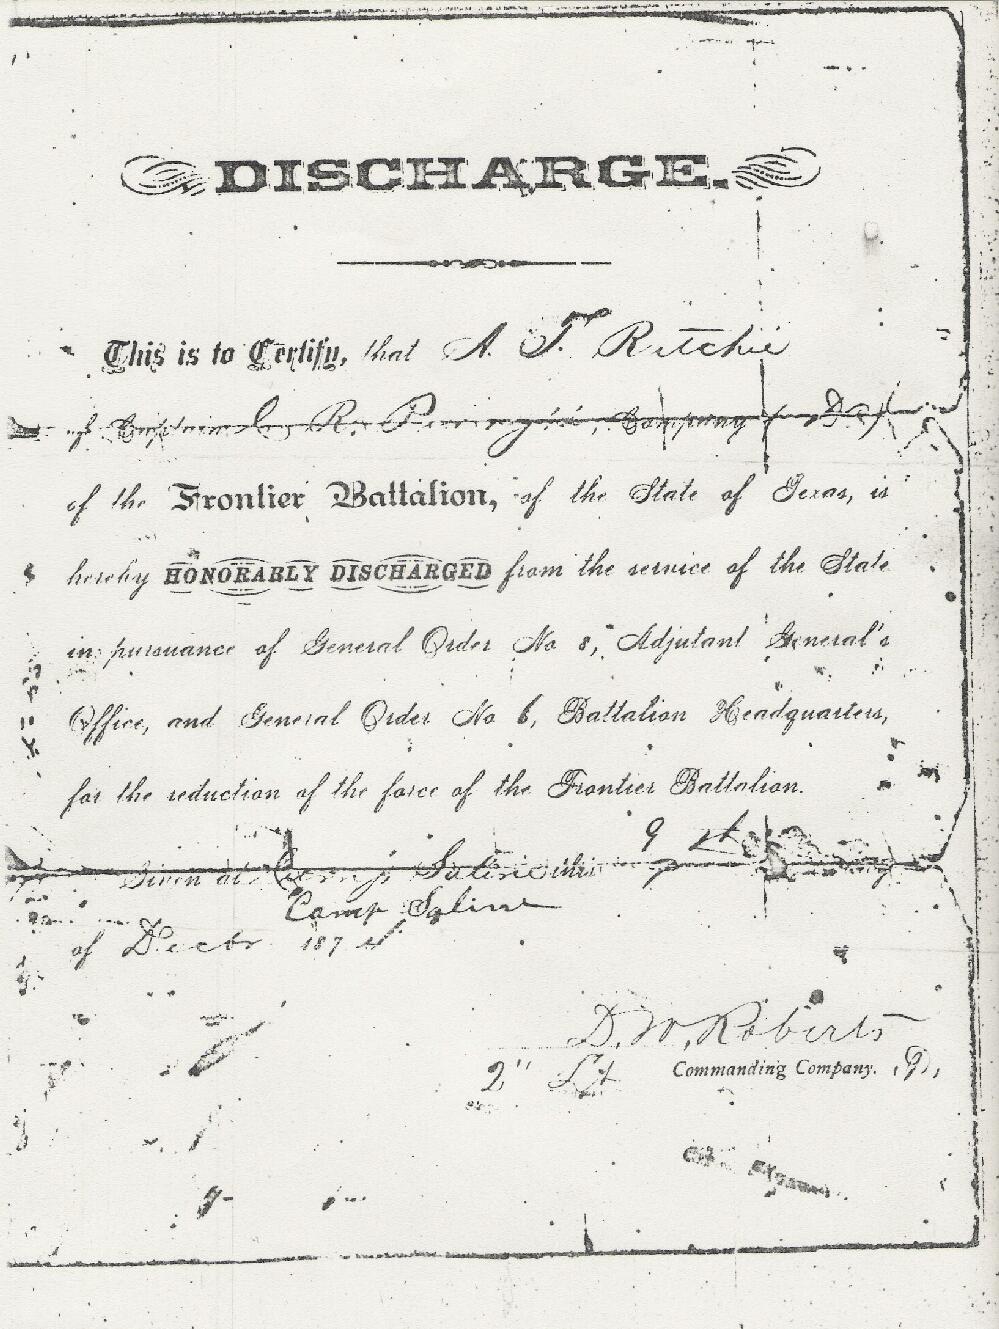 A. T. Ritchie--discharge papers, service of the State of Texas